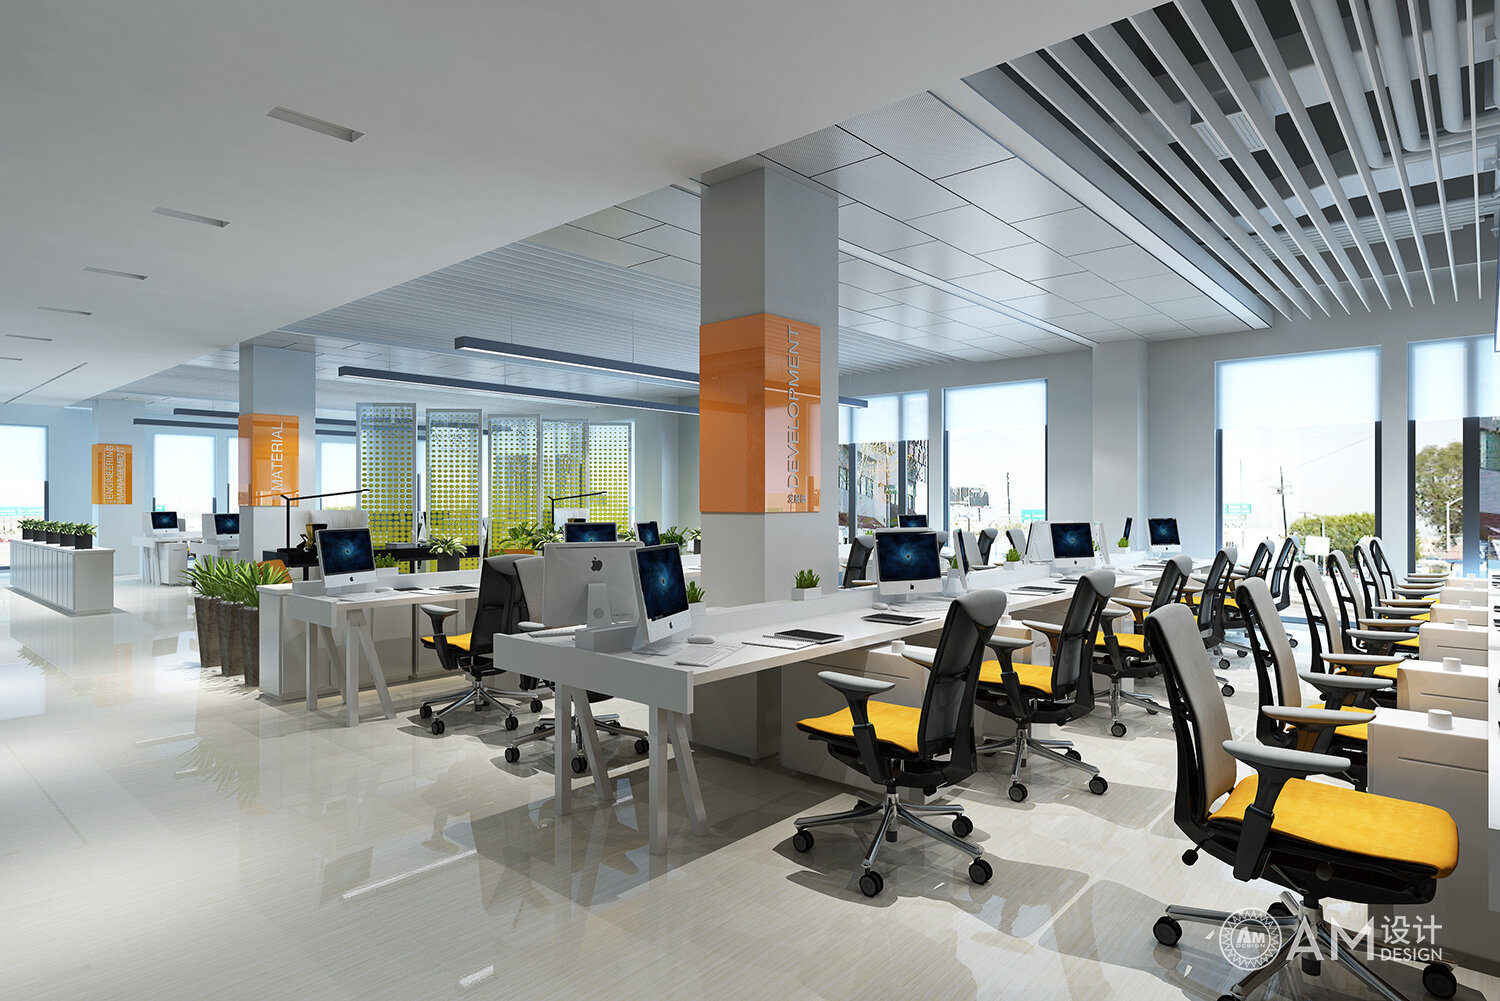 AM DESIGN | Office area design of Beijing Xincheng Thermal Group Office Building